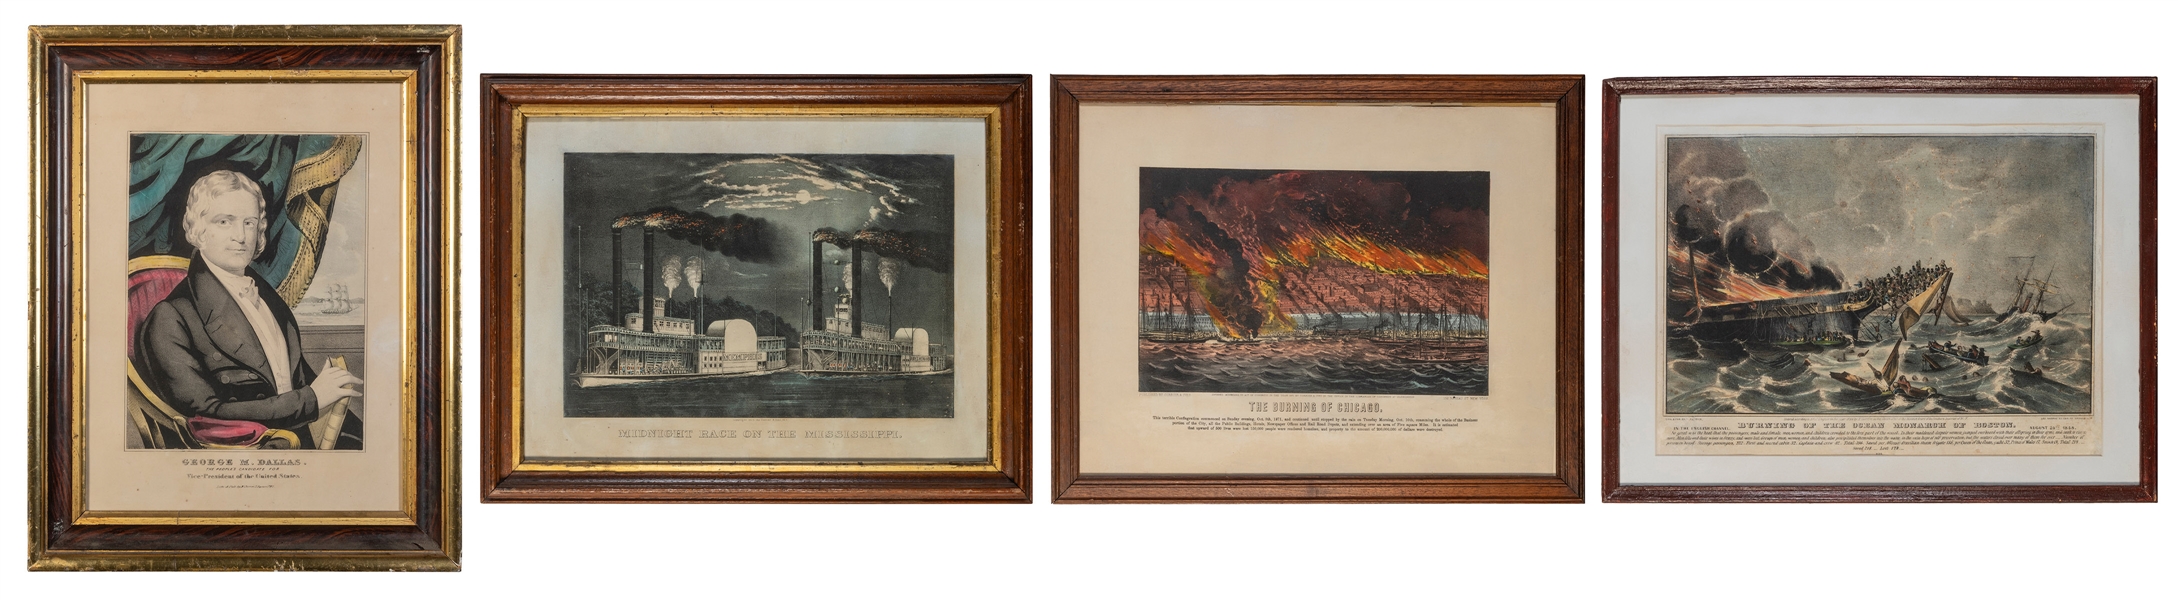  [CURRIER and IVES]. A group of 4 lithographs. Including: Ge...